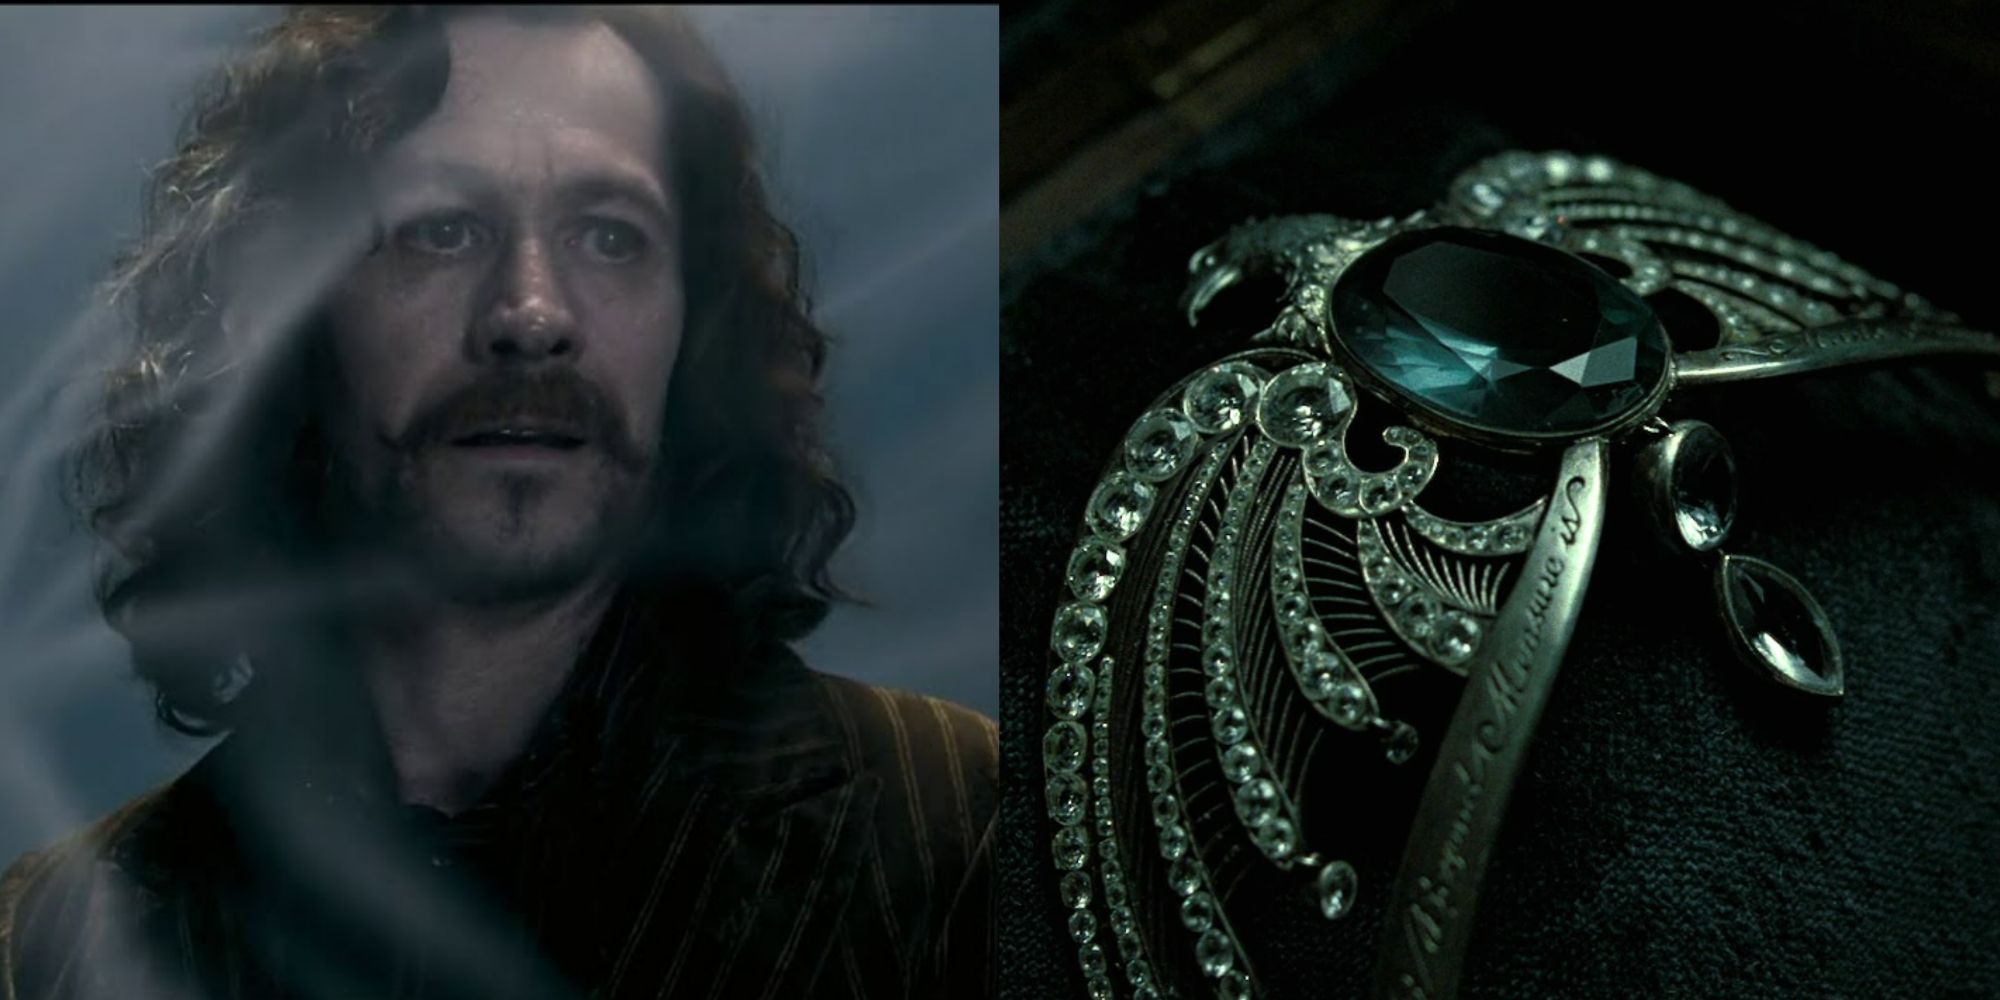 A split image showing Sirius Black on the left and the lost diadem on the right from Harry Potter. 